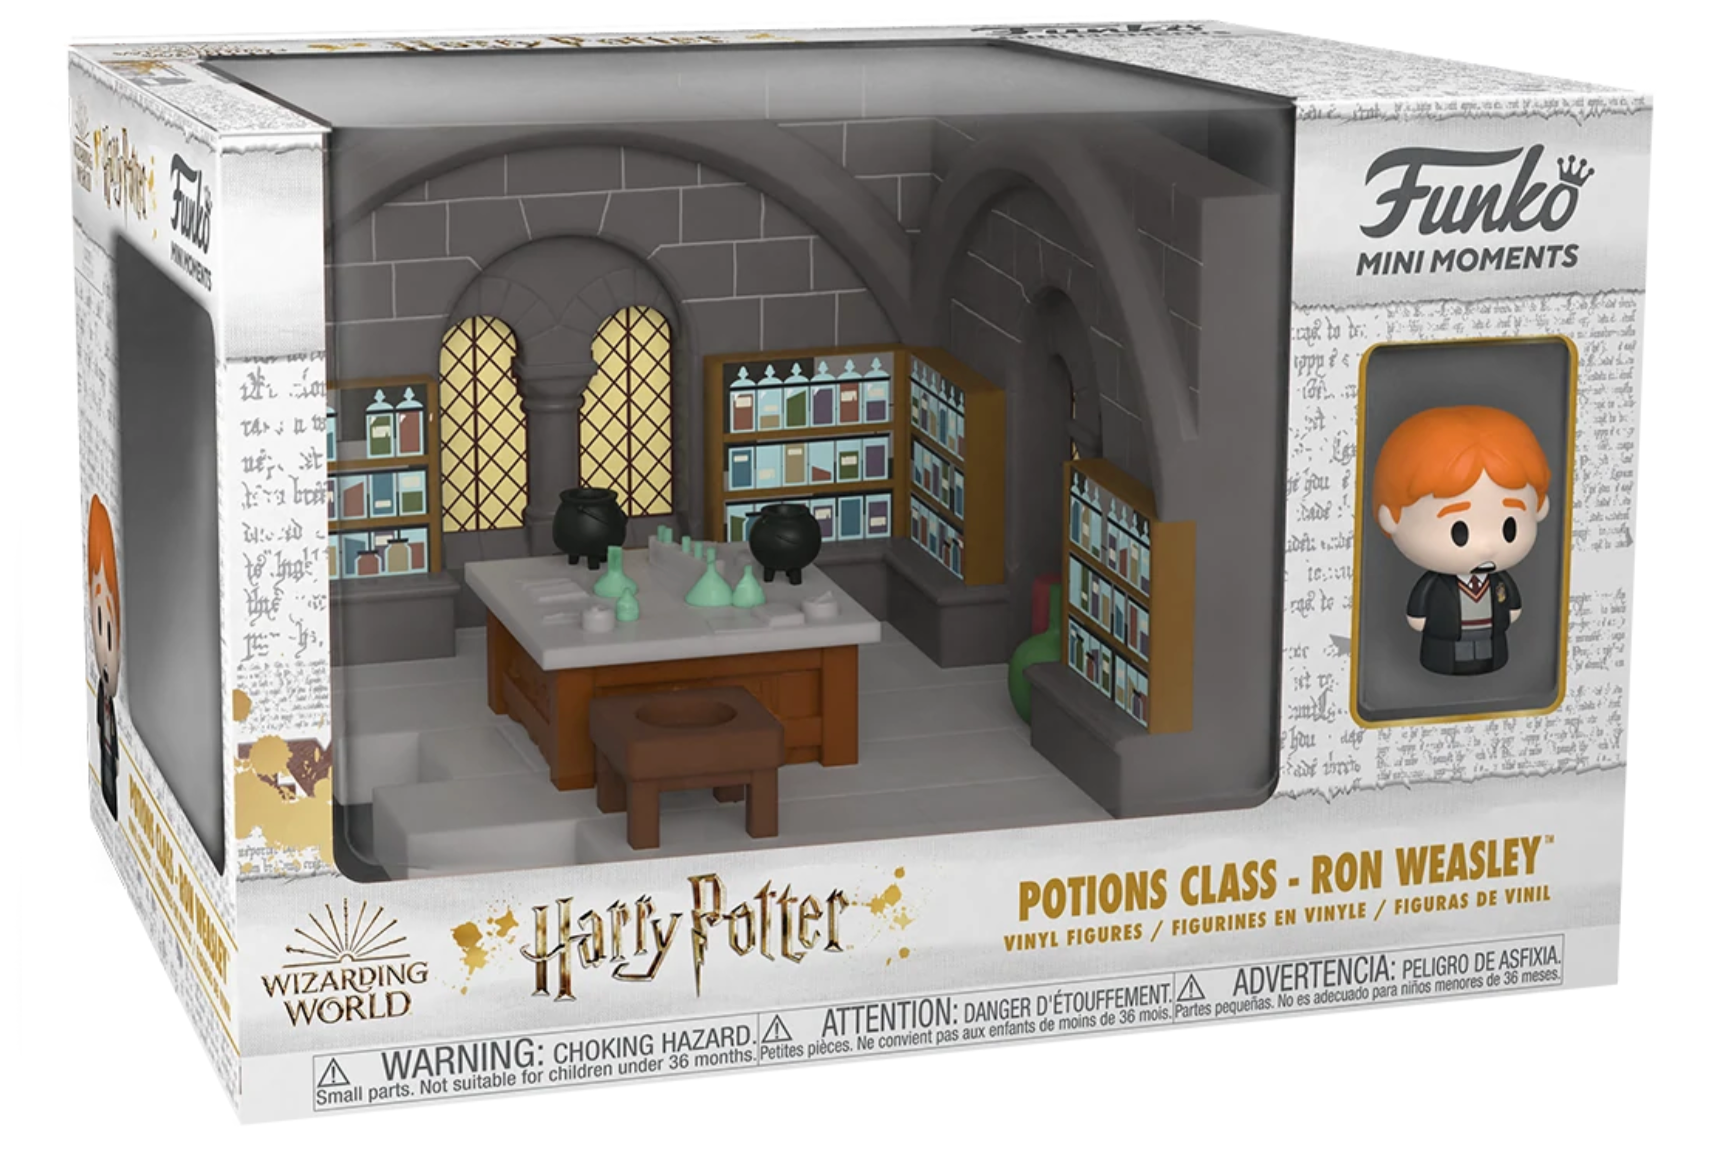 Harry Potter Mini Moments: Potions Class - Ron Weasley